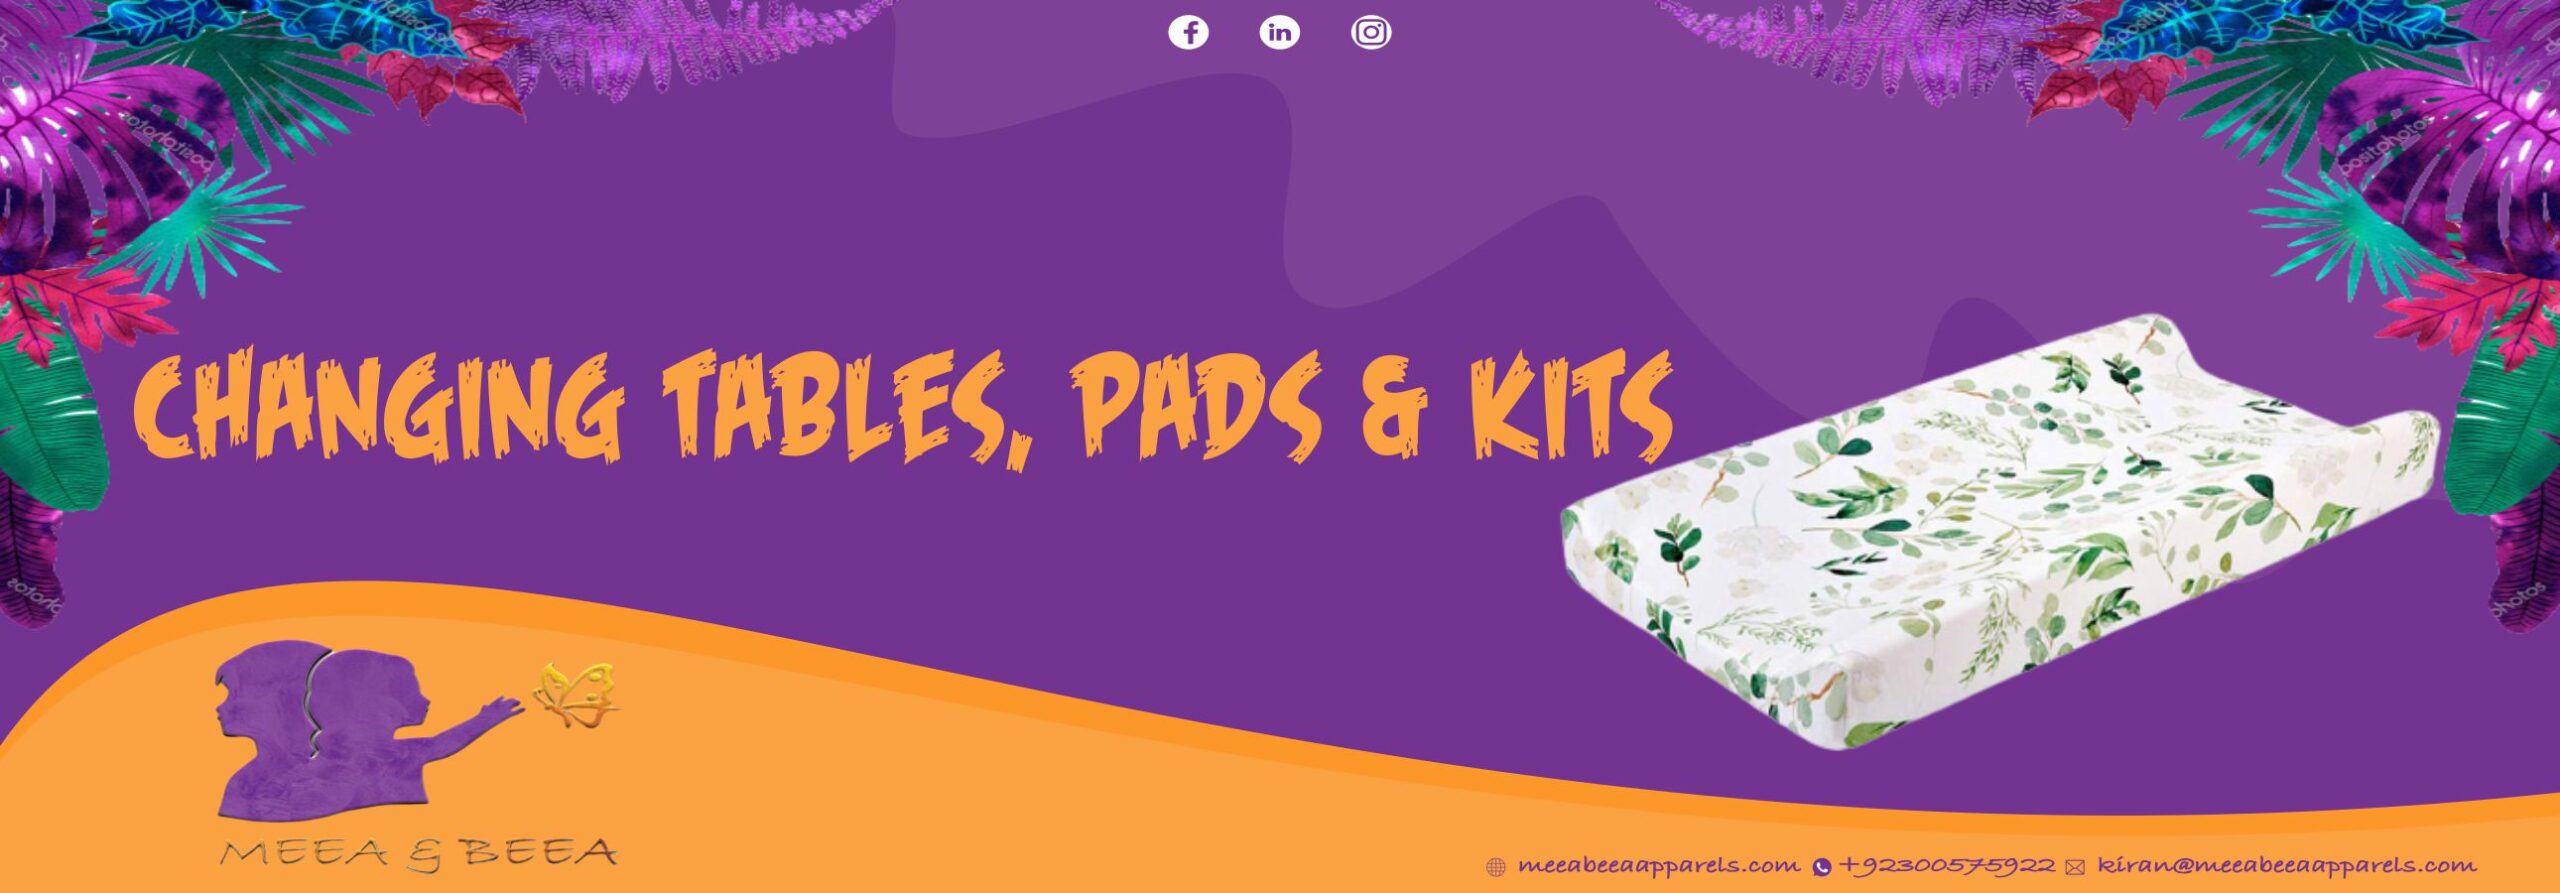 Changing Tables, Pads & Kits